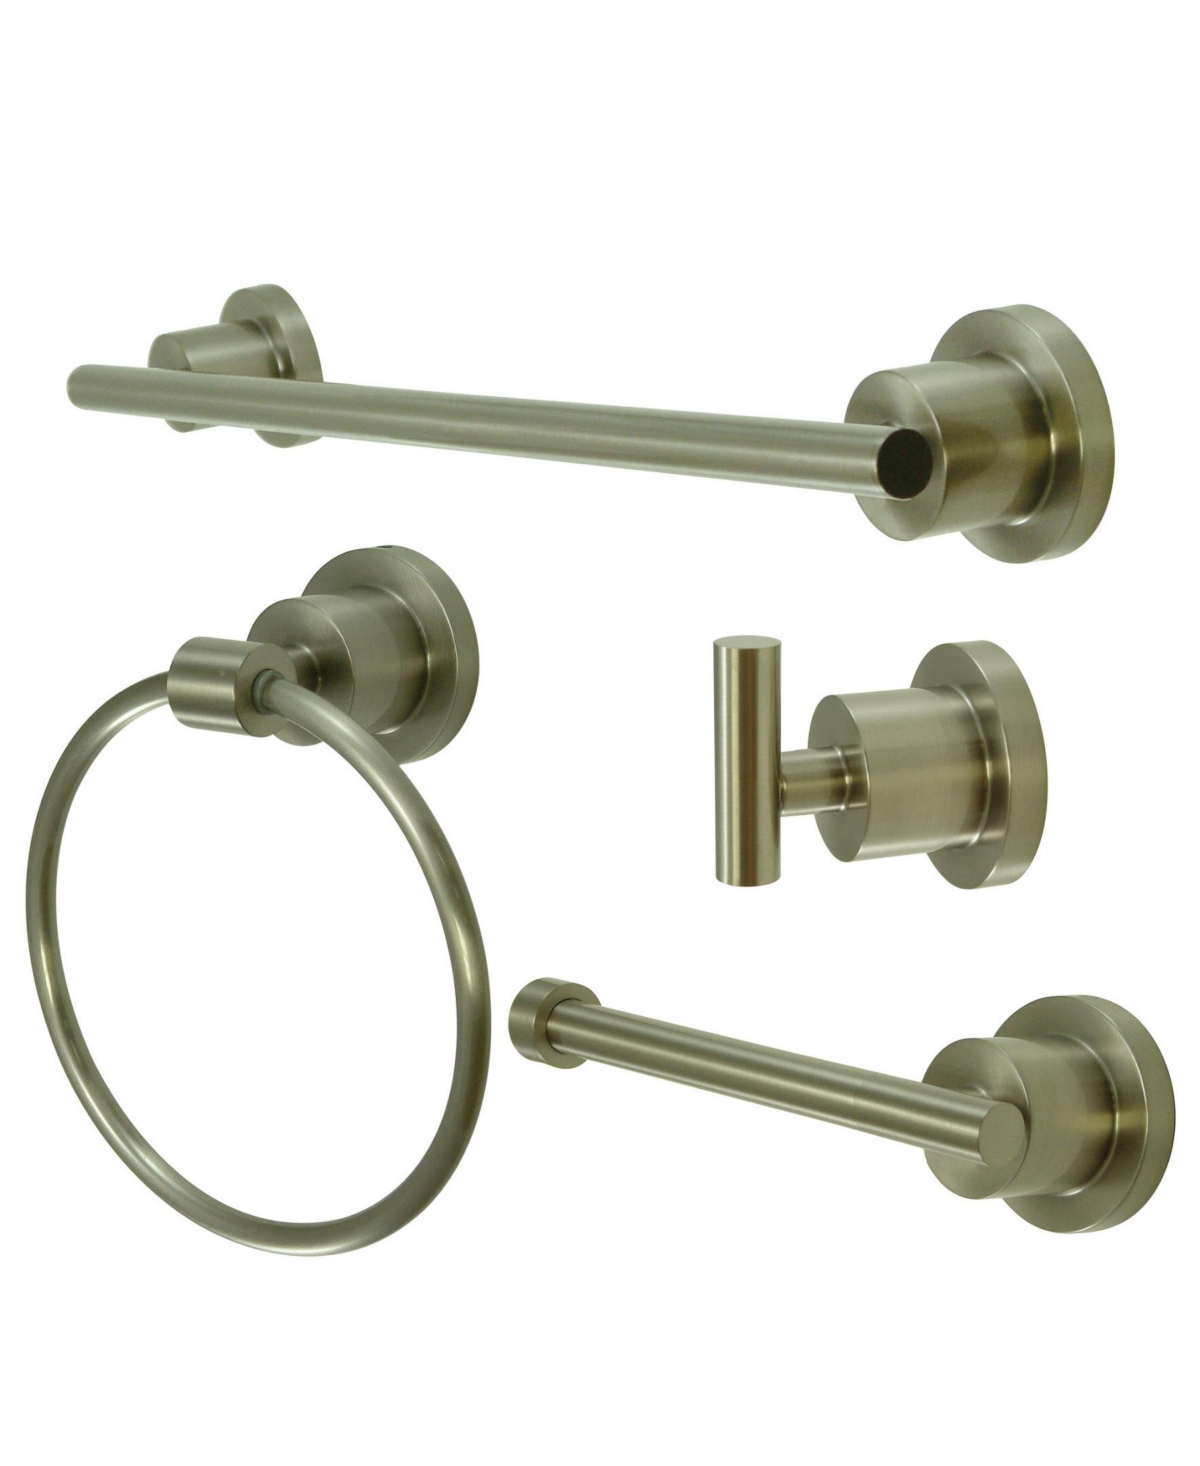 Kingston Brass Concord Modern 4-Pc. Bathroom Accessories Set in Brushed Nickel Bedding